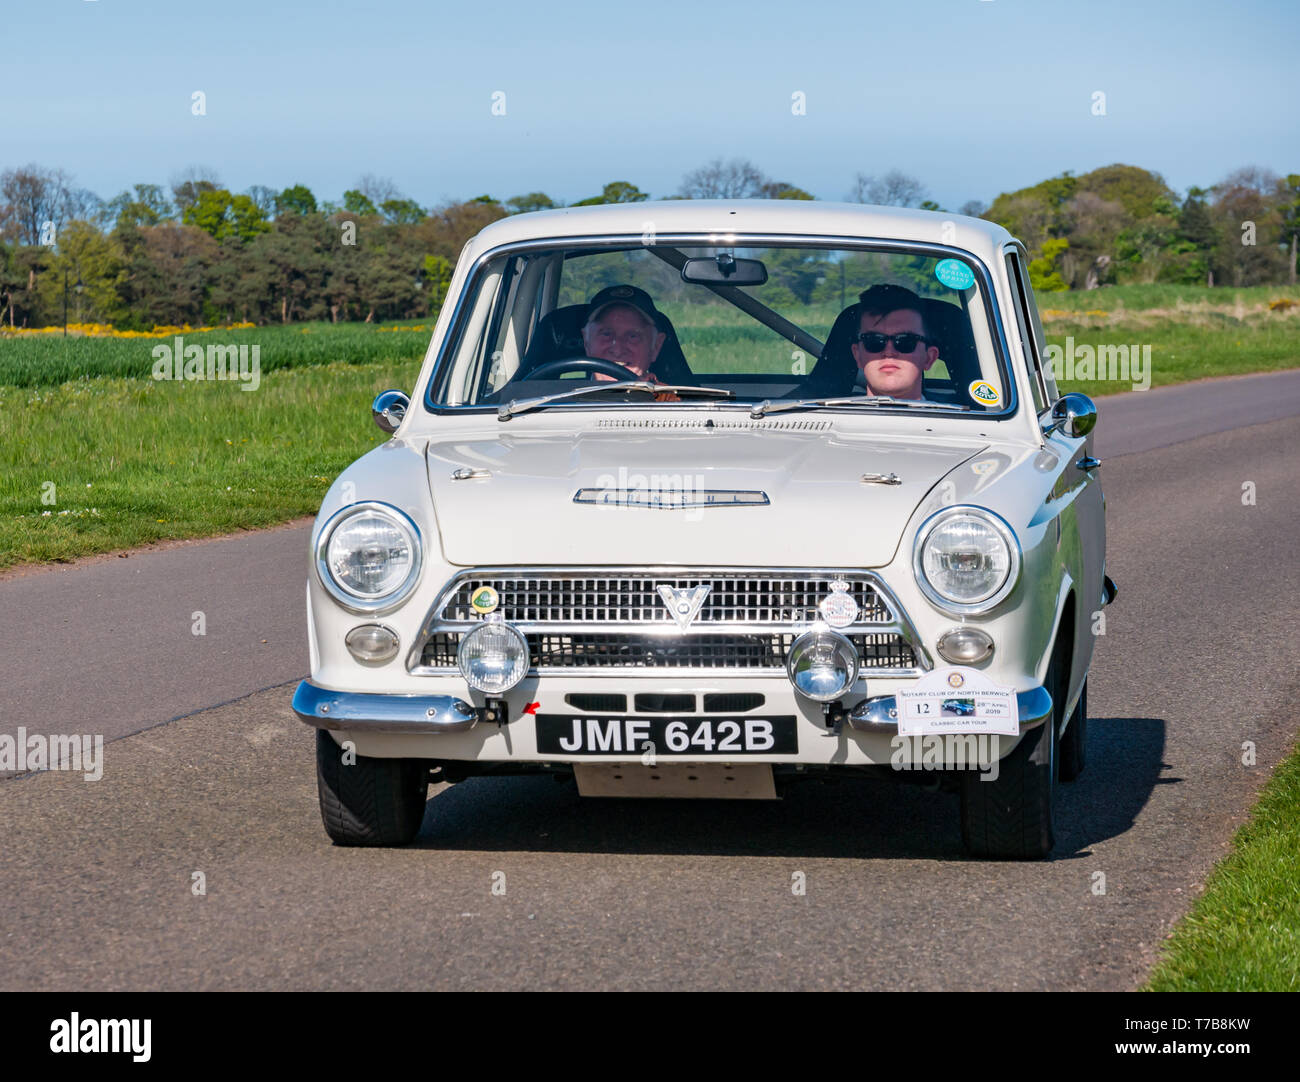 Vintage 1964 Ford Consul car arriving at Archerfield Estate, North Berwick Rotary Club Classic Car Tour 2019, East Lothian, Scotland, UK Stock Photo